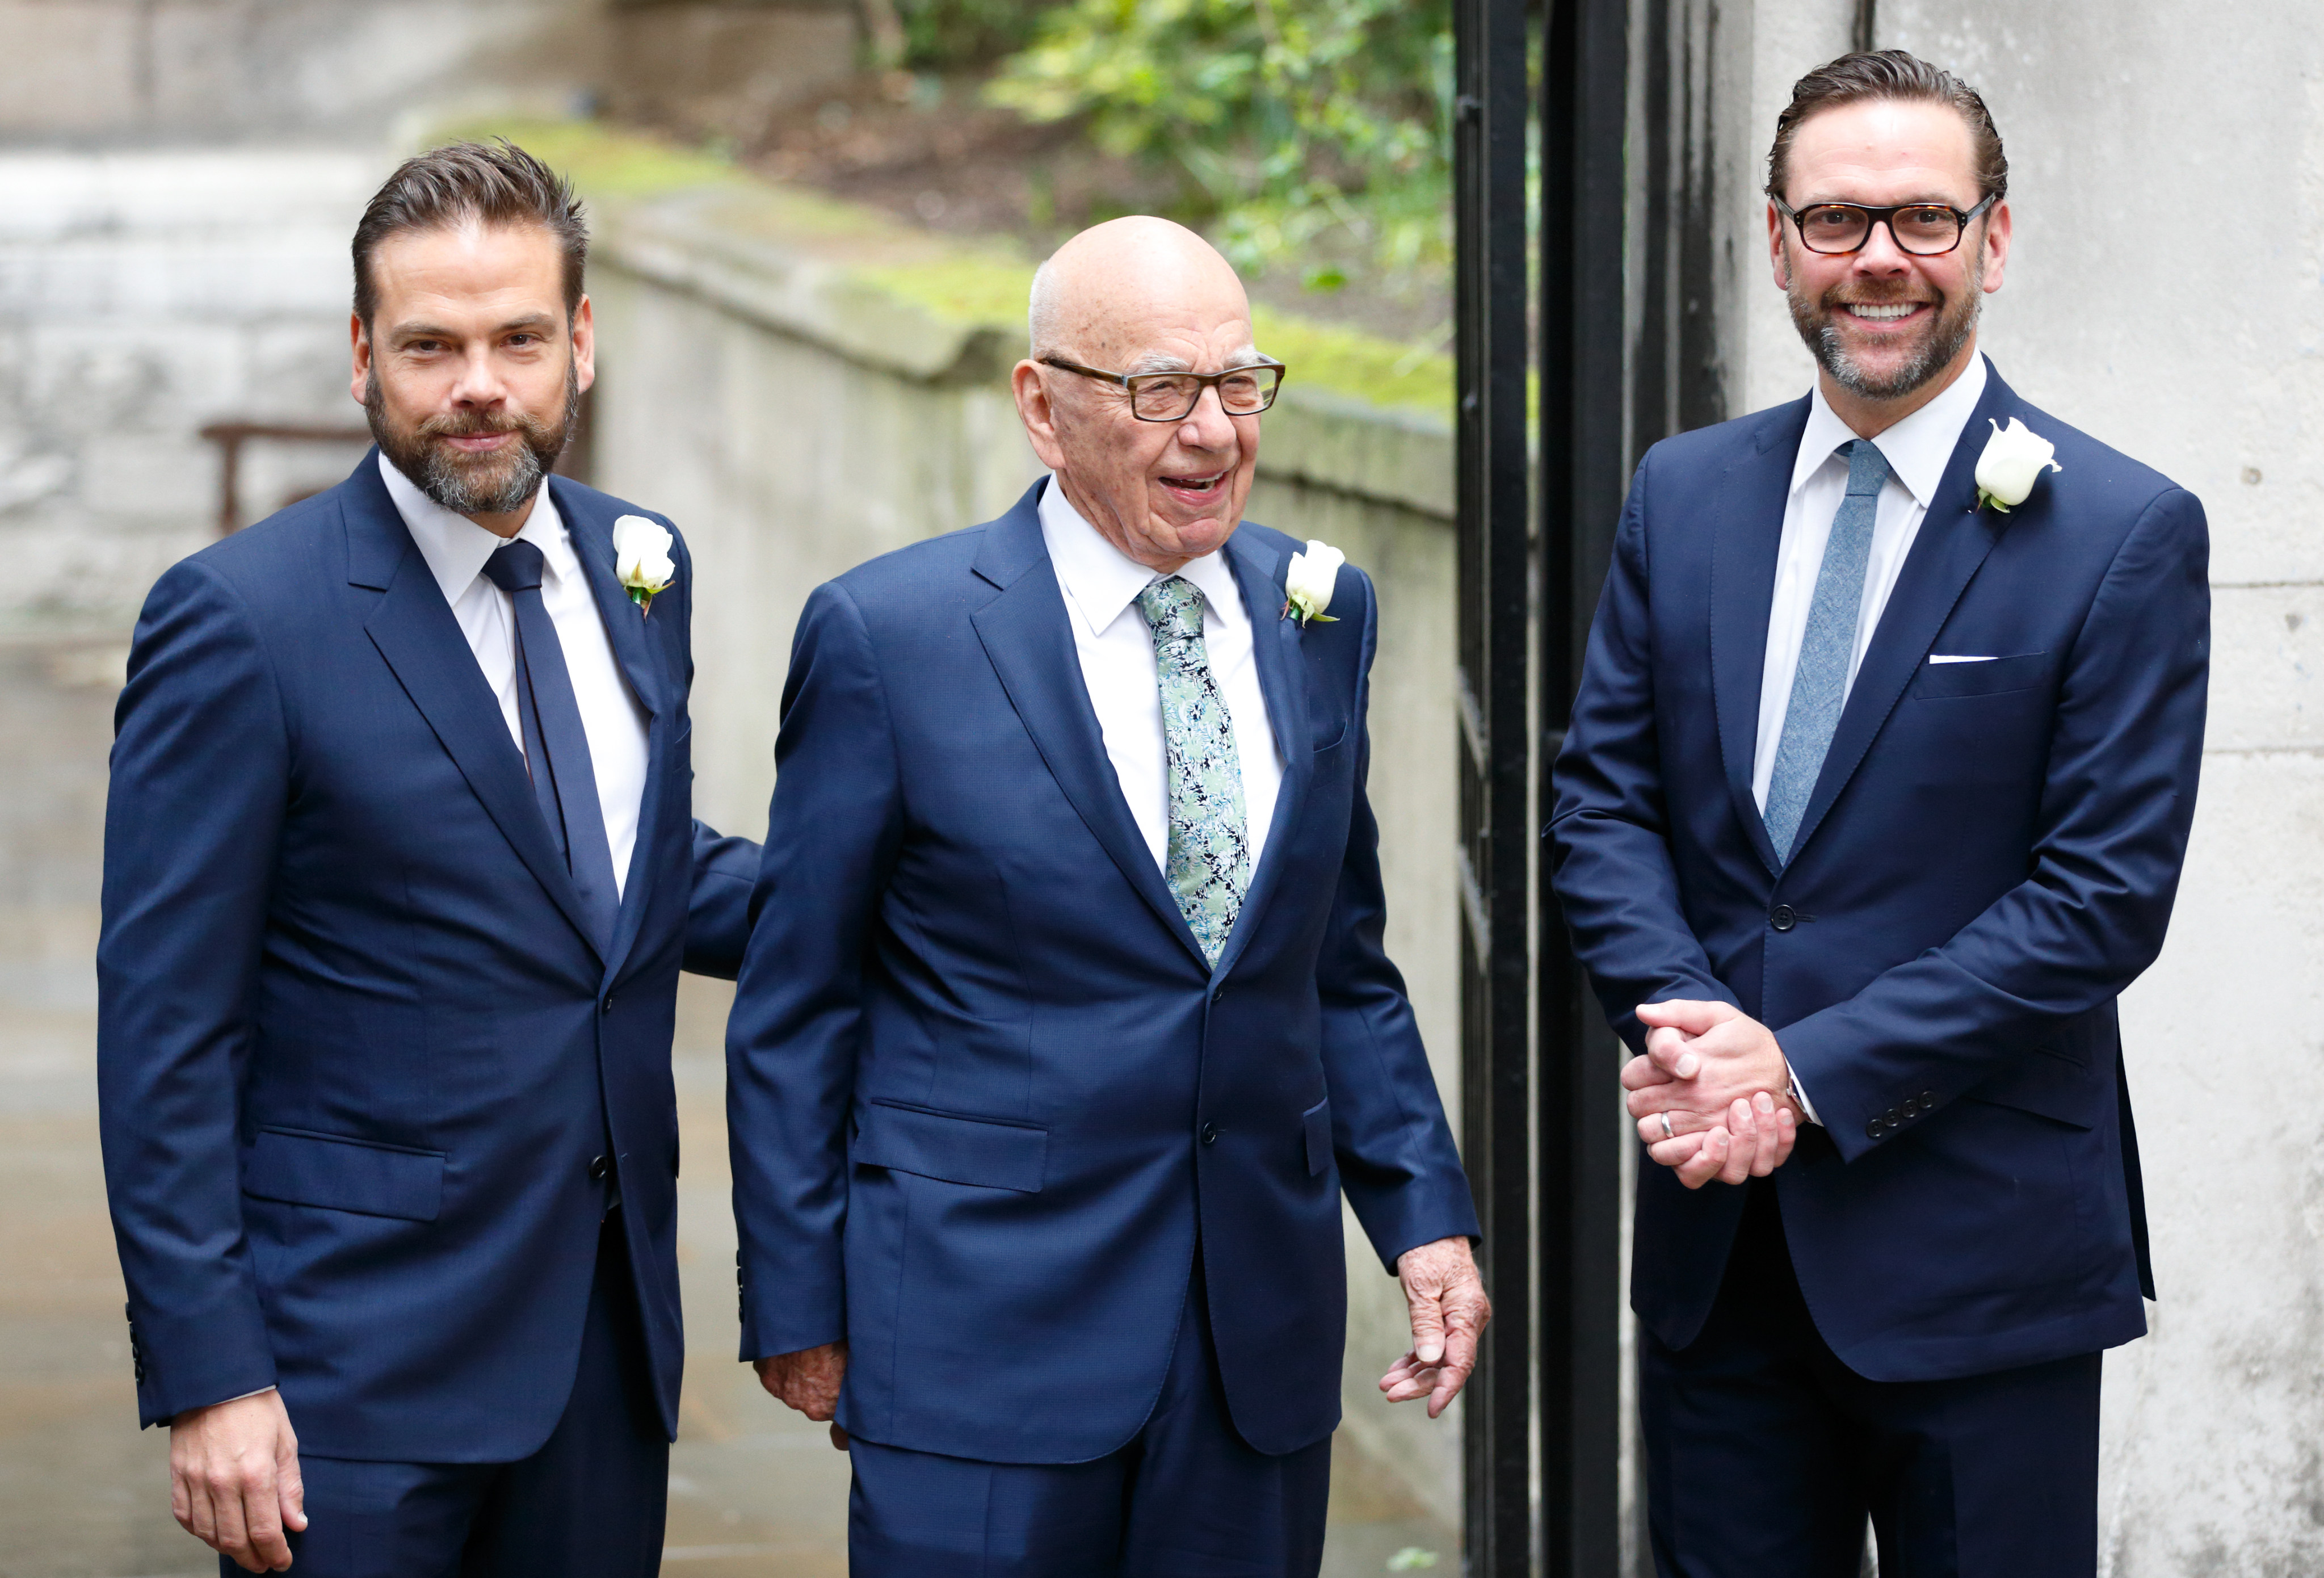 Like father like son? Rupert Murdoch with his sons, Lachlan and James. Photo: Getty Images